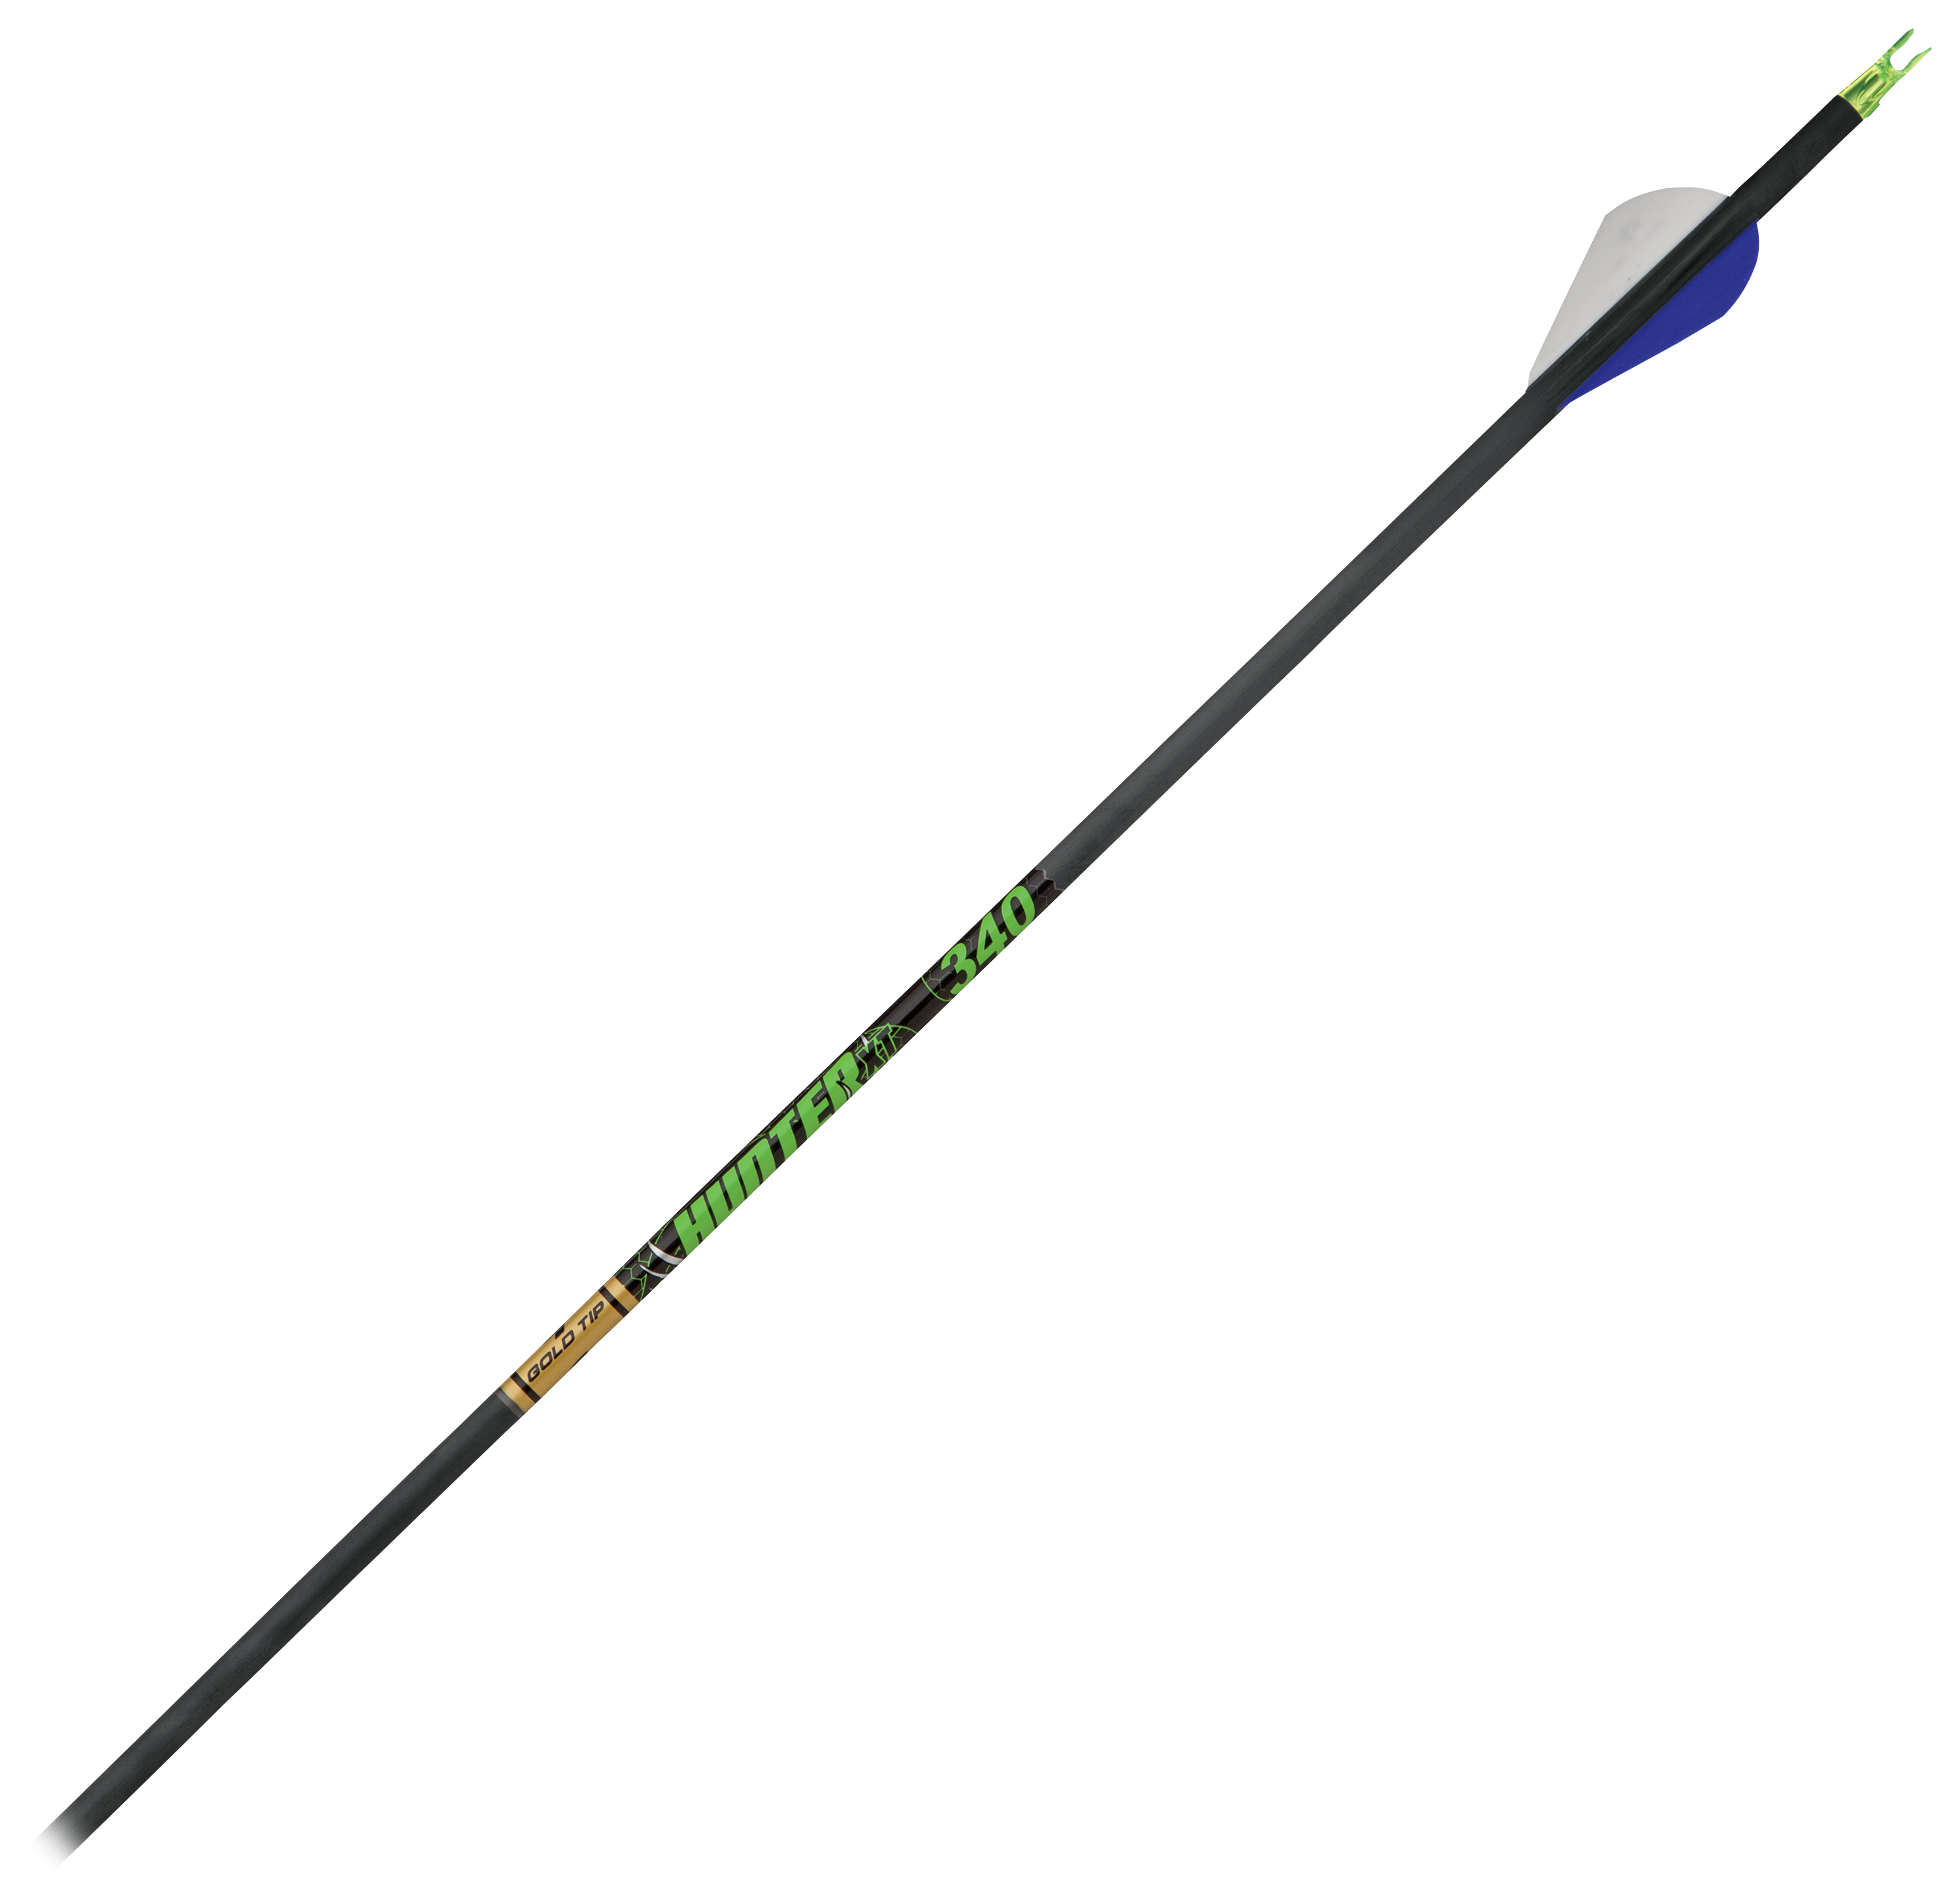 Gold Tip XT Hunter Carbon Hunting Arrows - Size 340